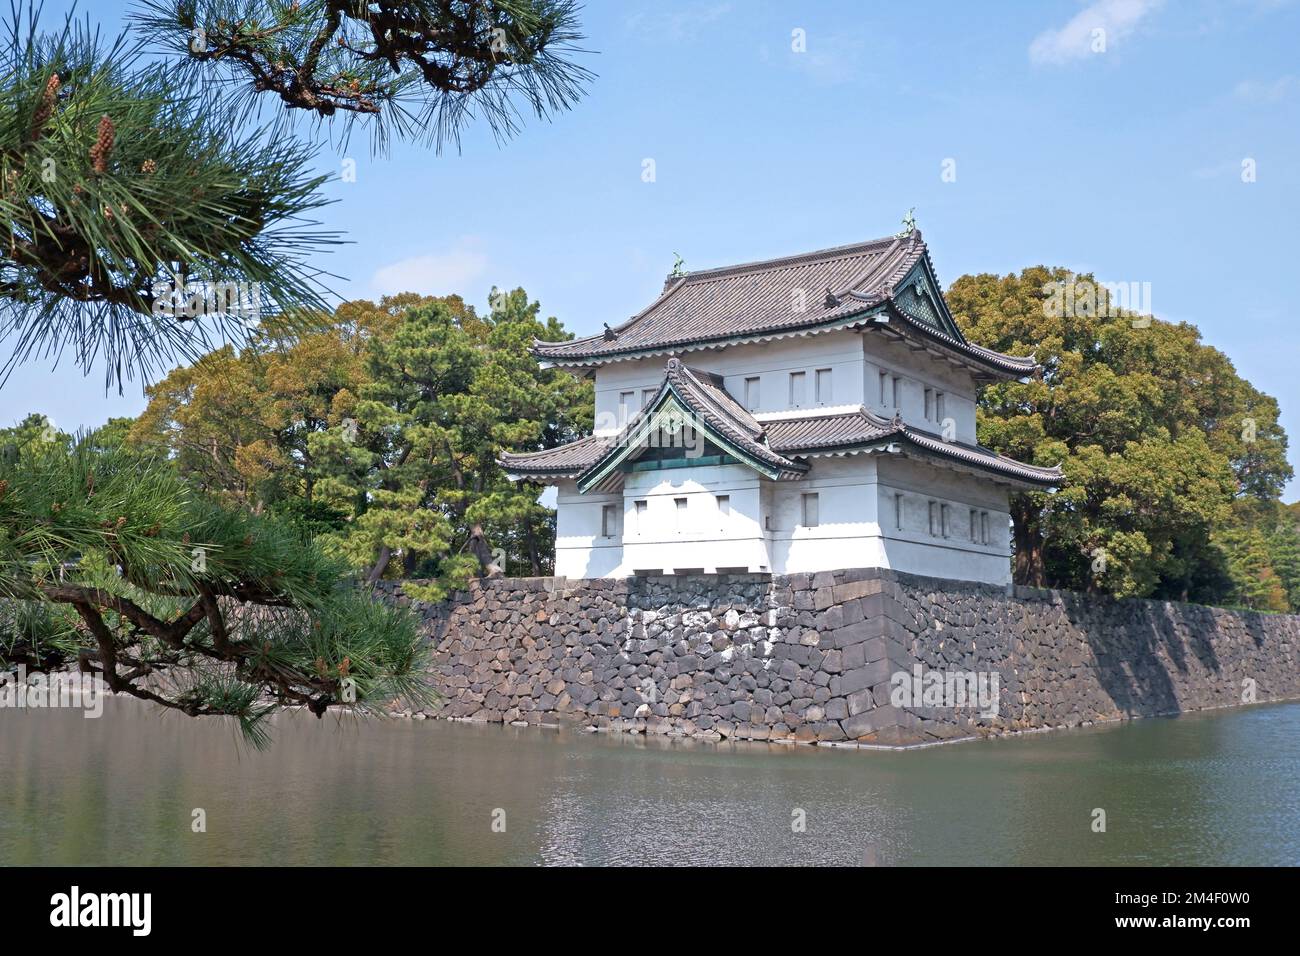 The Japanese castle with river and pine tree in springtime Stock Photo